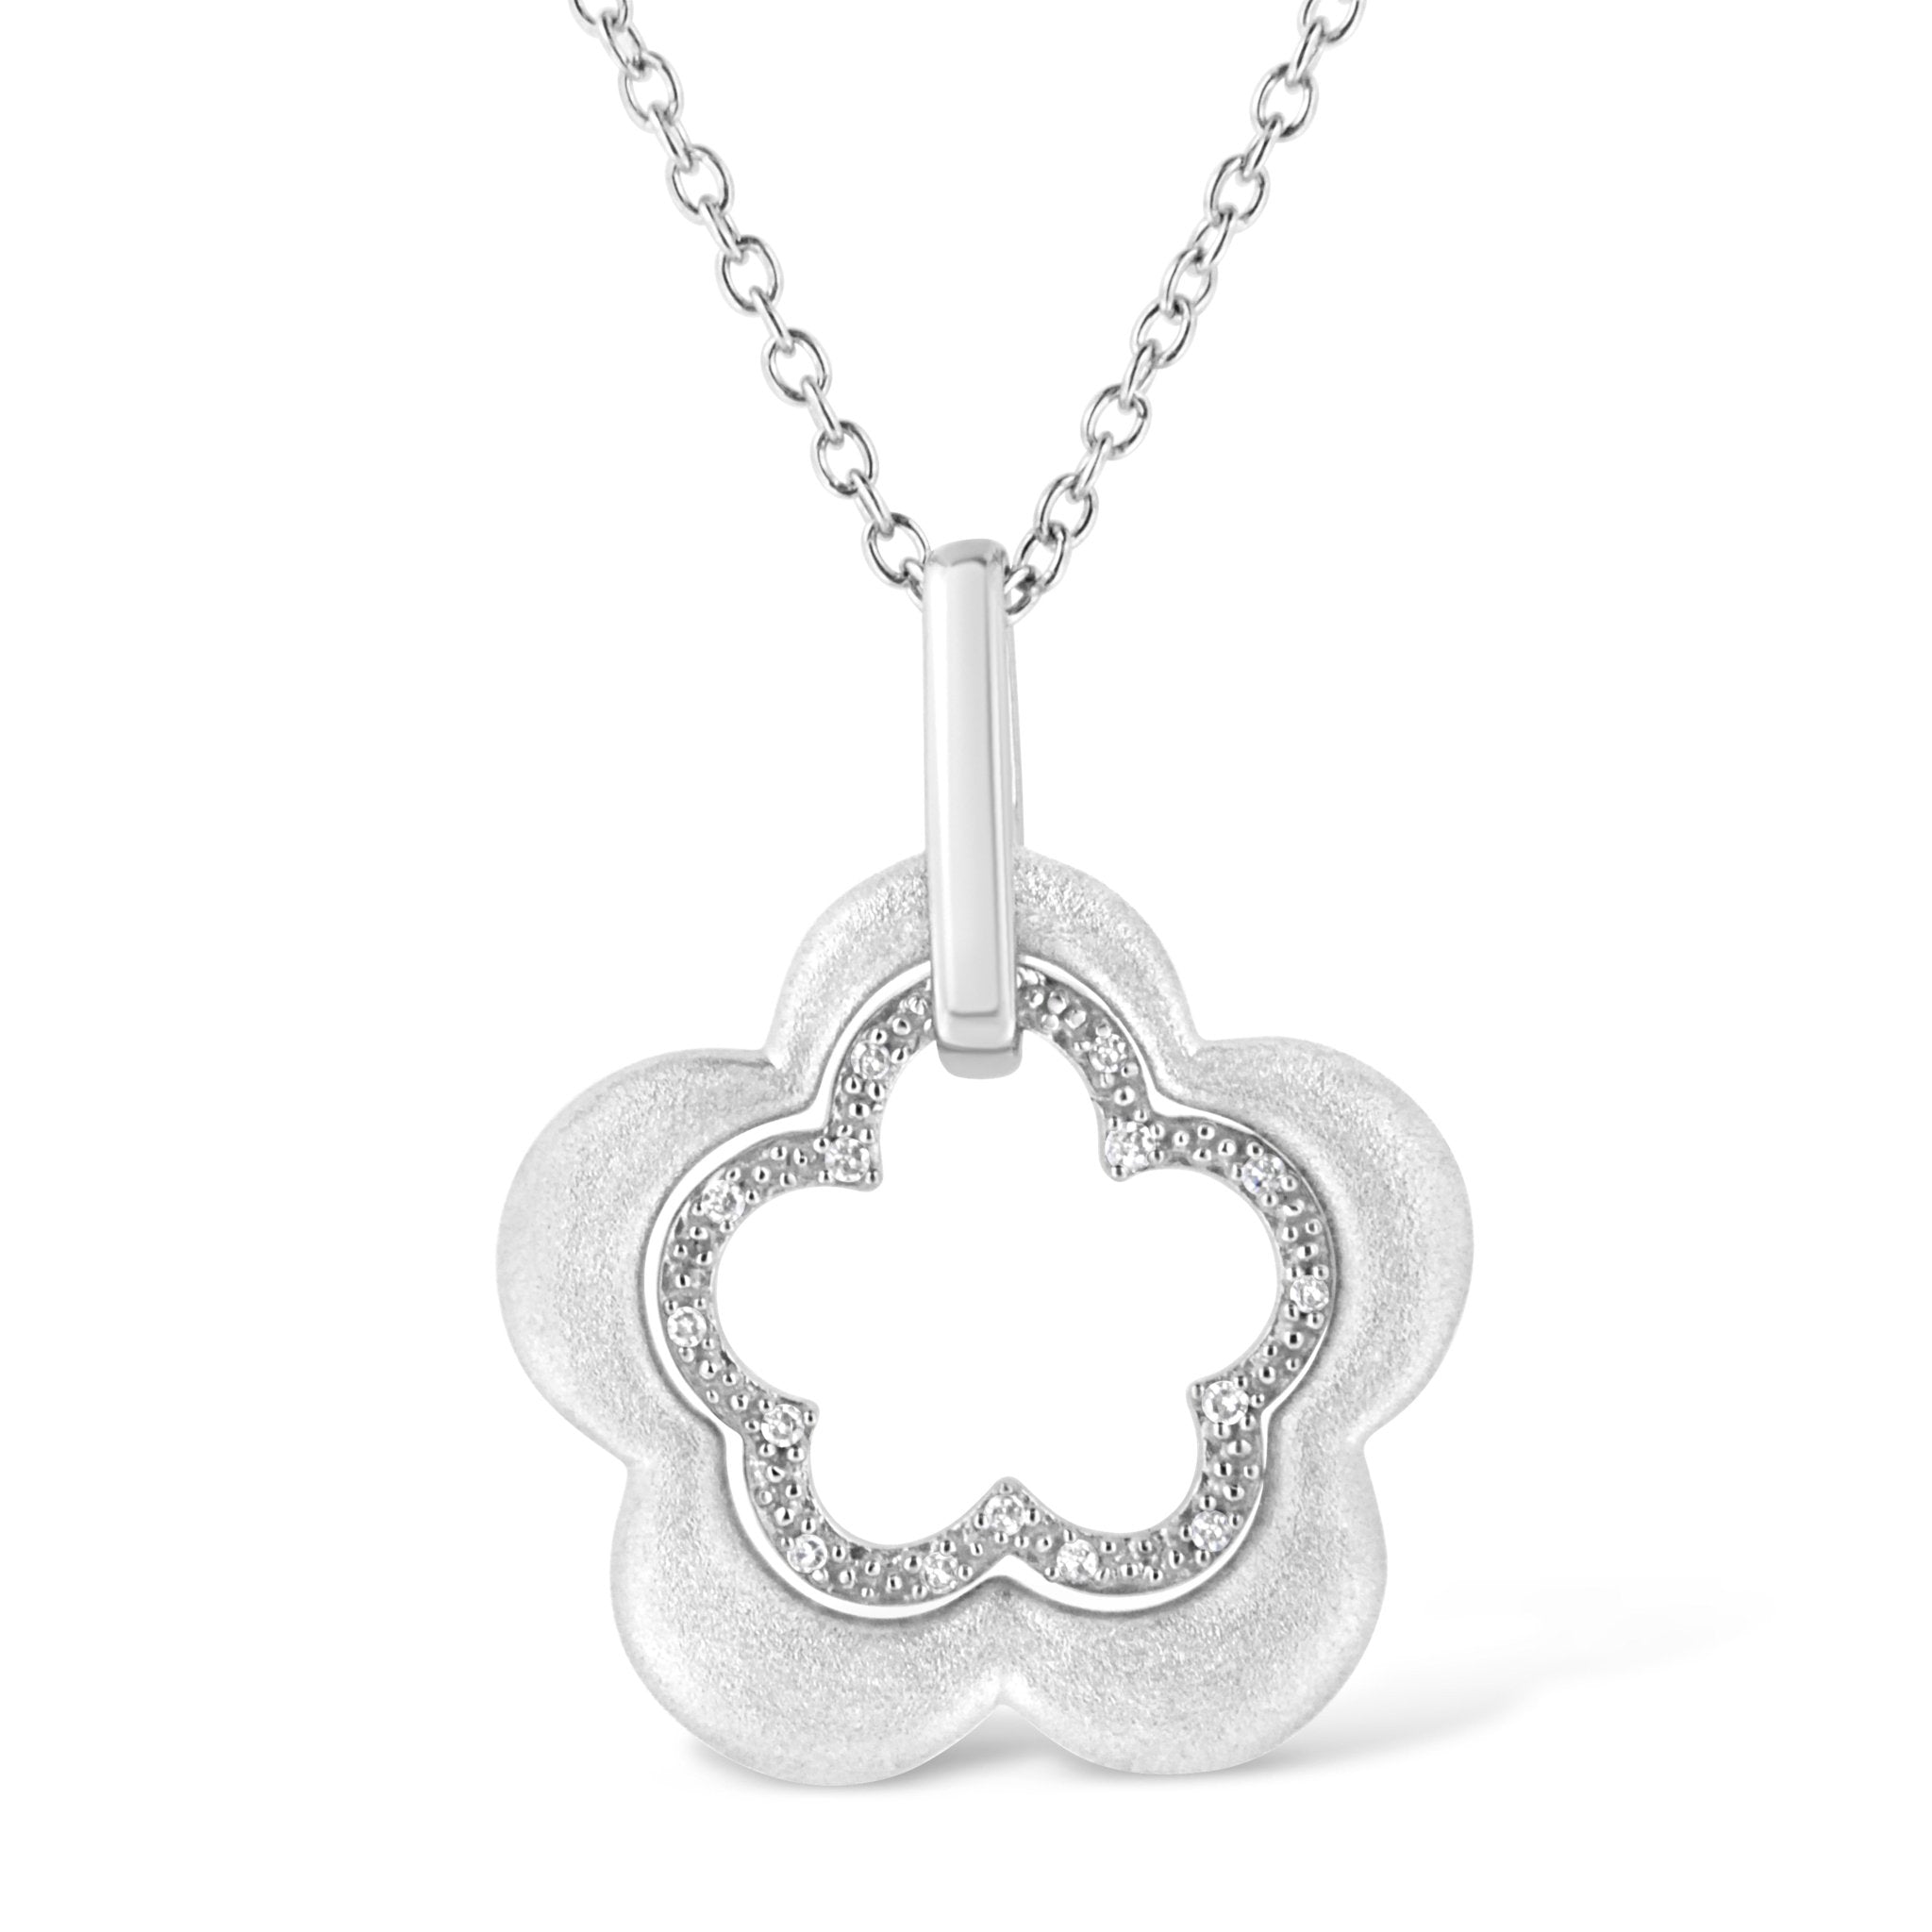 Matte Finished .925 Sterling Silver Diamond Accent Double Flower Shape 18" Satin Finished Pendant Necklace (I-J Color, I1-I2 Clarity) - Tuesday Morning-Pendant Necklace